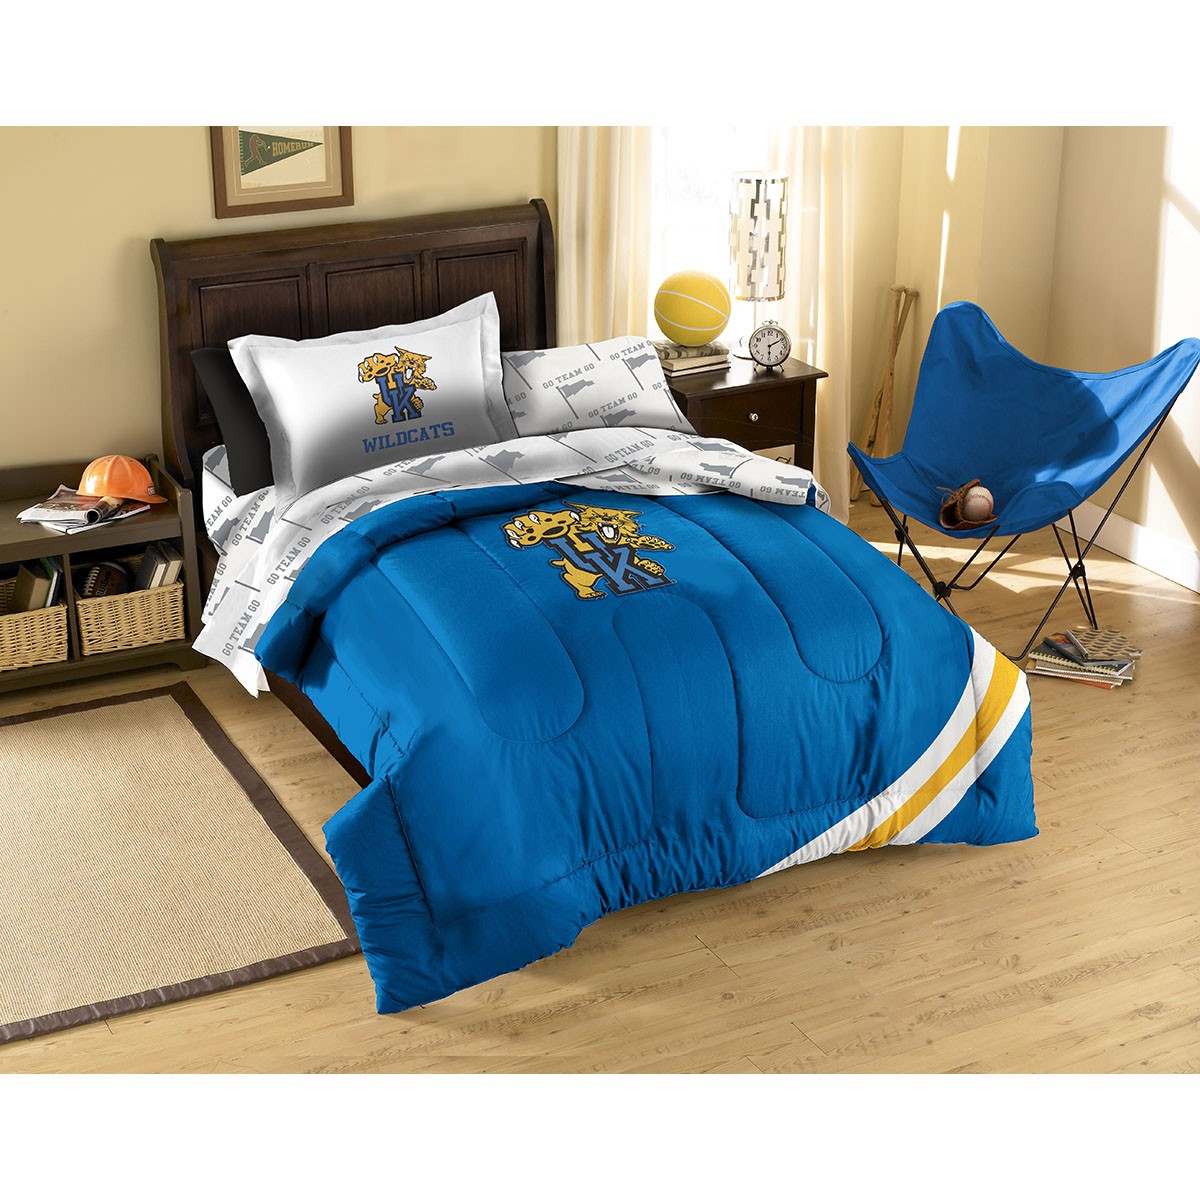 Kentucky Wildcats Contrast Twin Forter Bed In A Bag